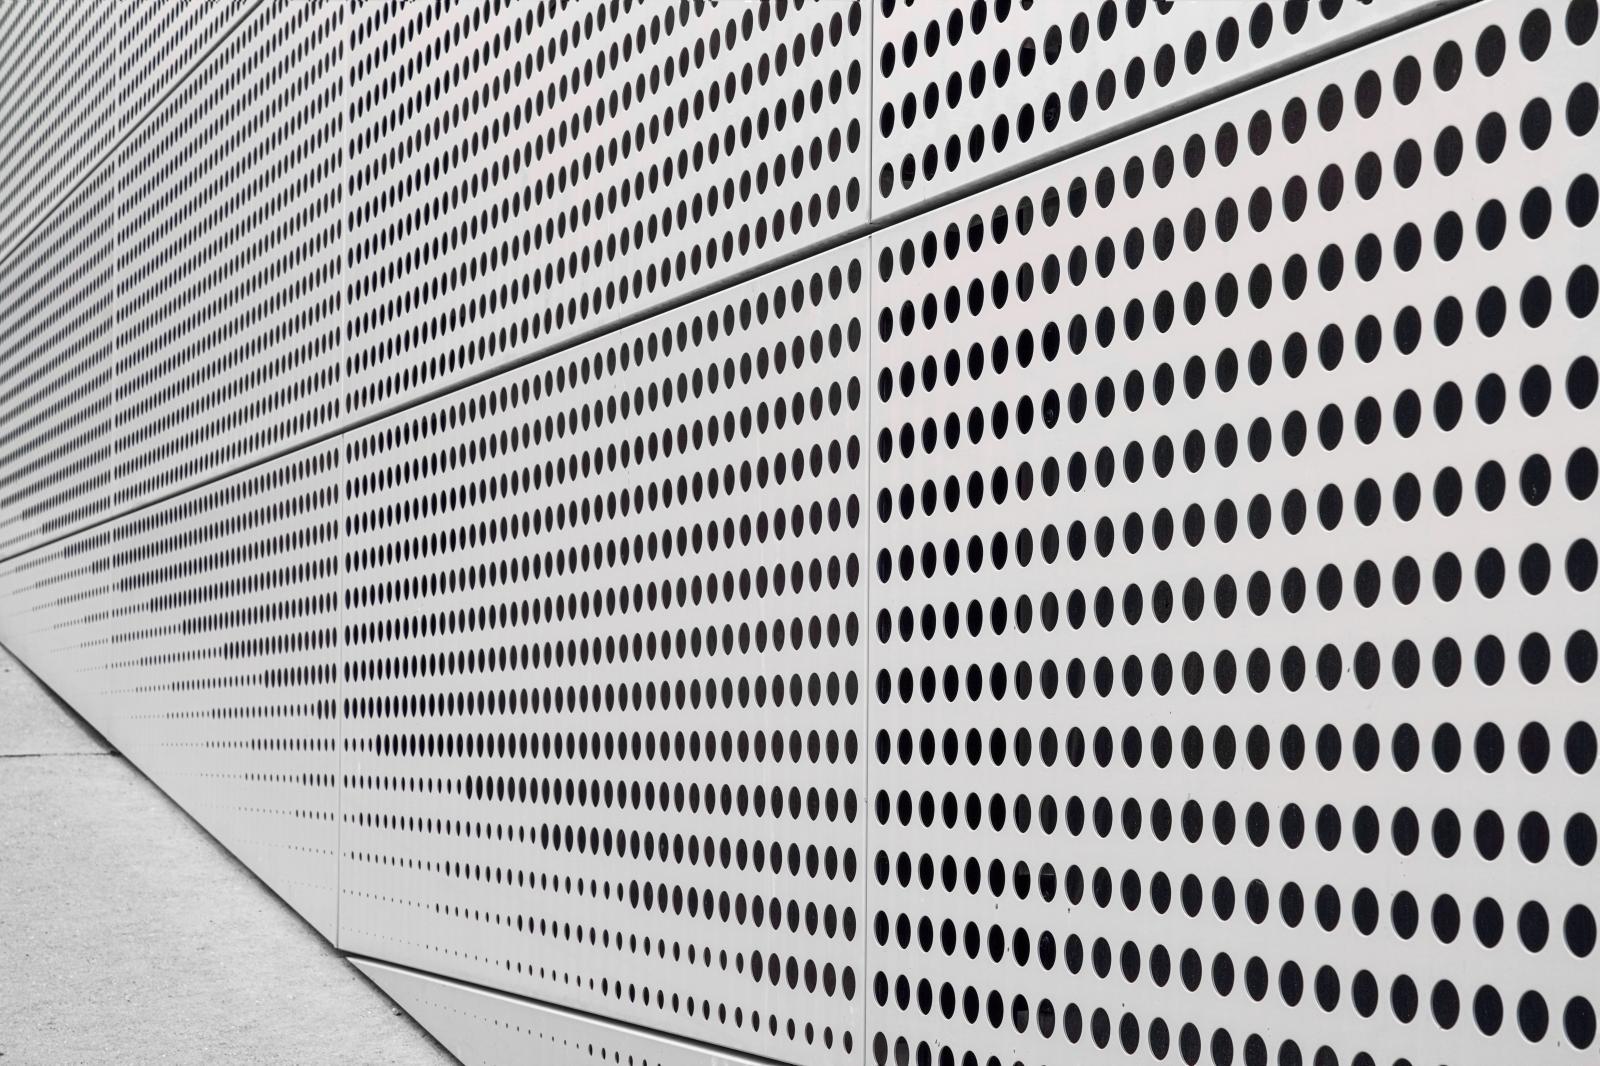 Perforated Performance: A mesmerizing Pattern of Dots